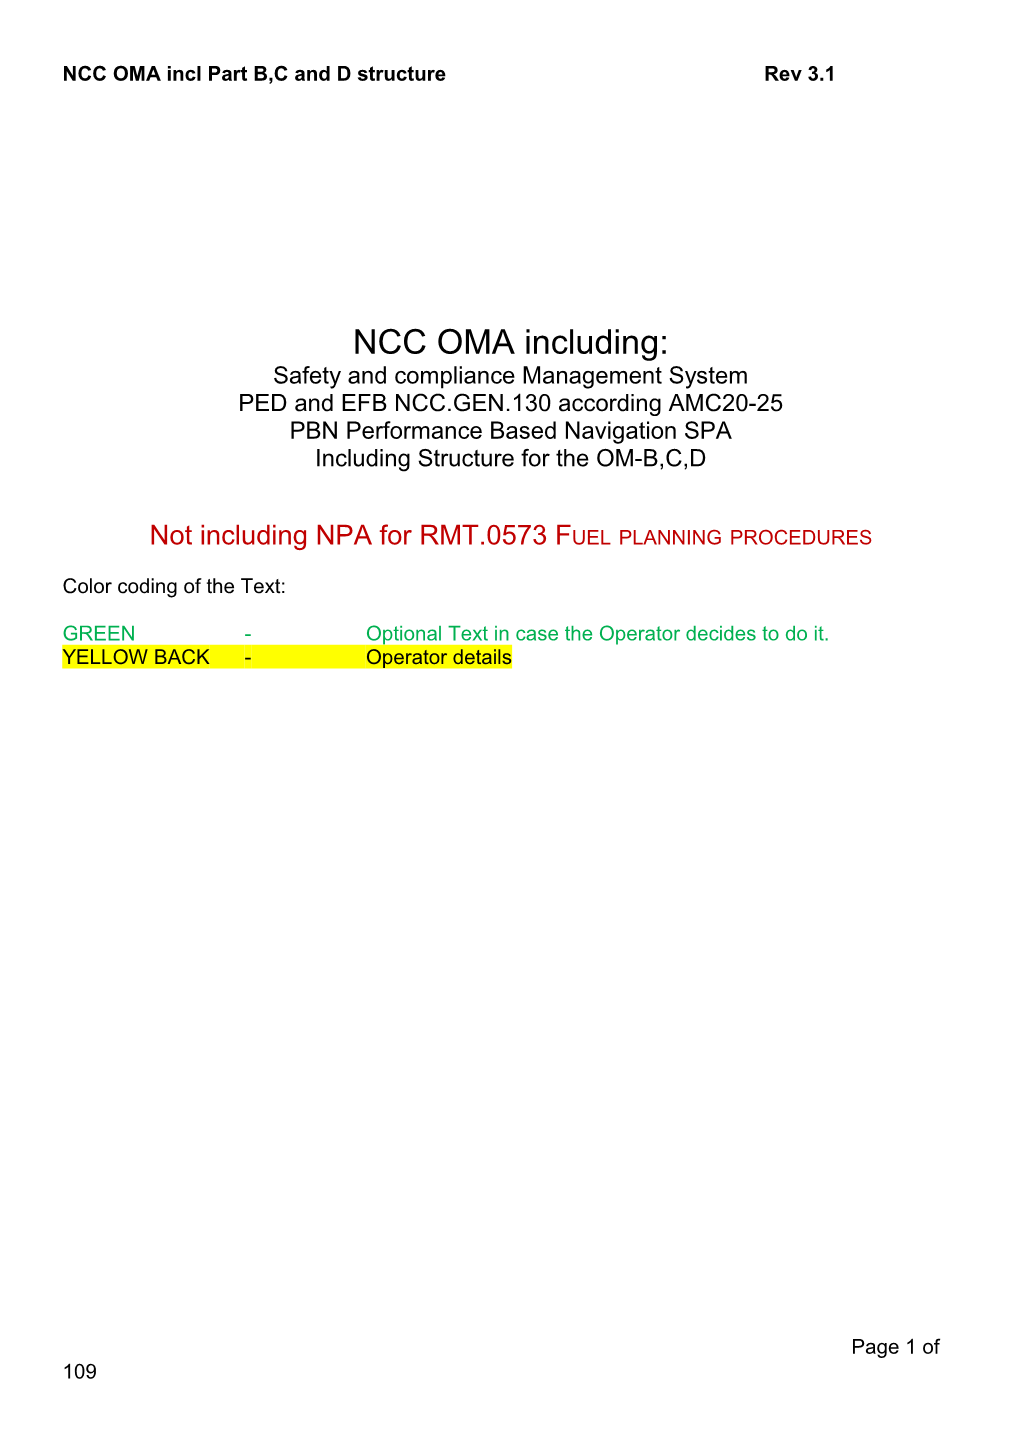 NCC OMA Incl Part B,C and D Structurerev 3.1